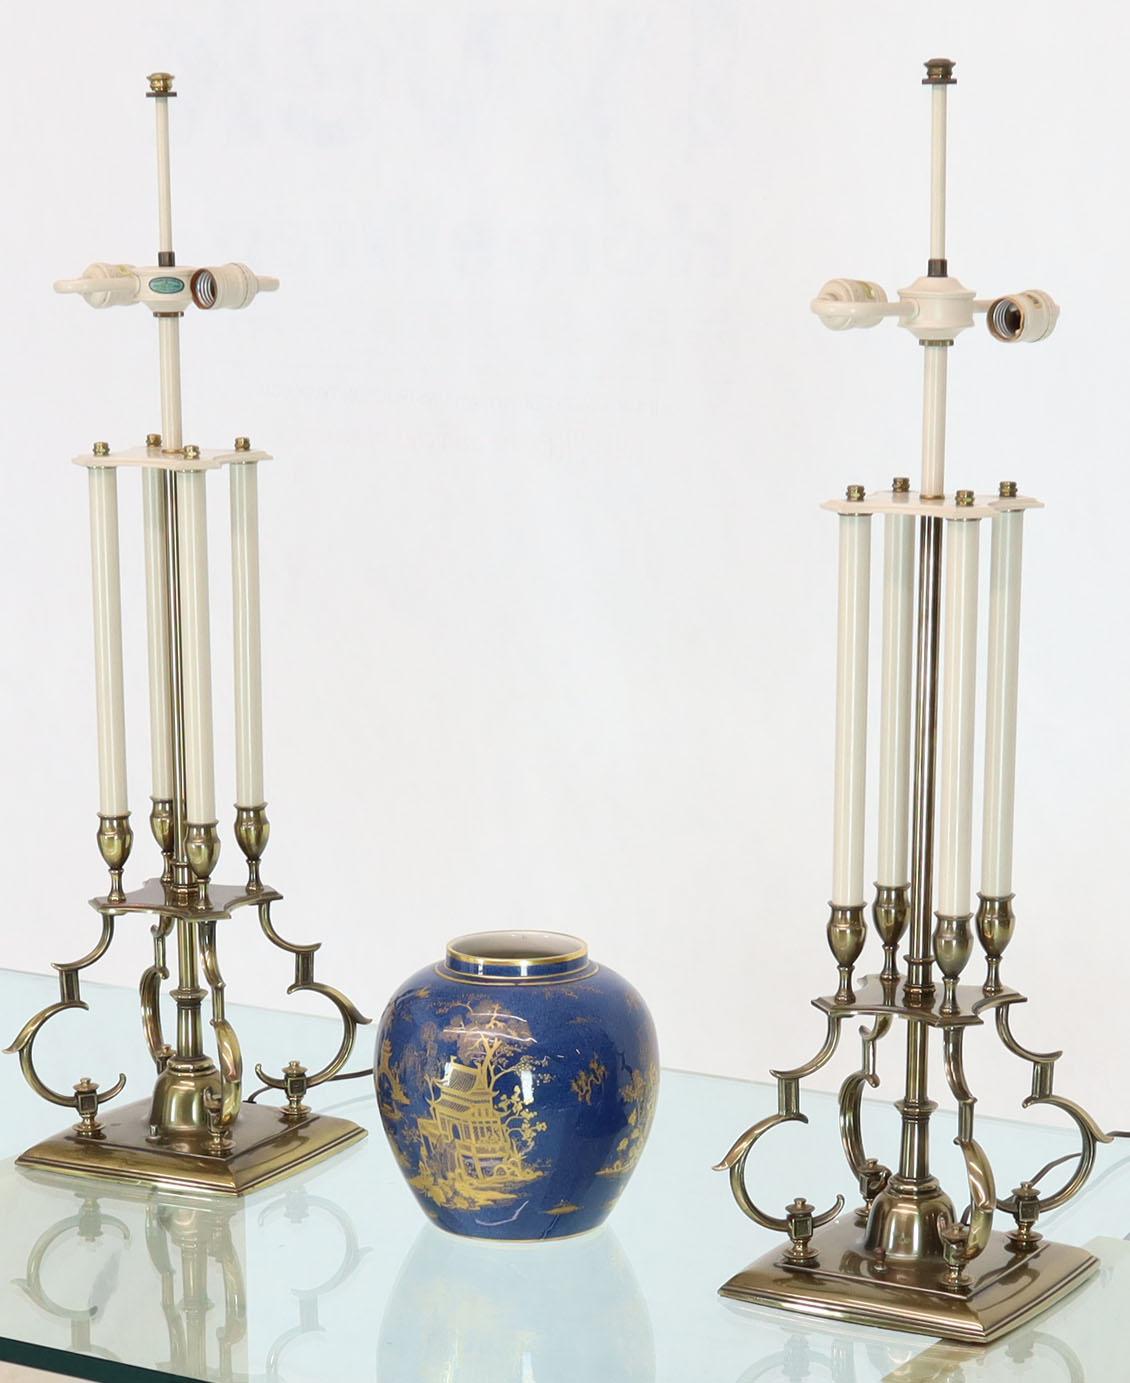 Pair of large heavy brass table lamps by Stiffel. High quality solid and decorative pair of lamps from circa 1970s.